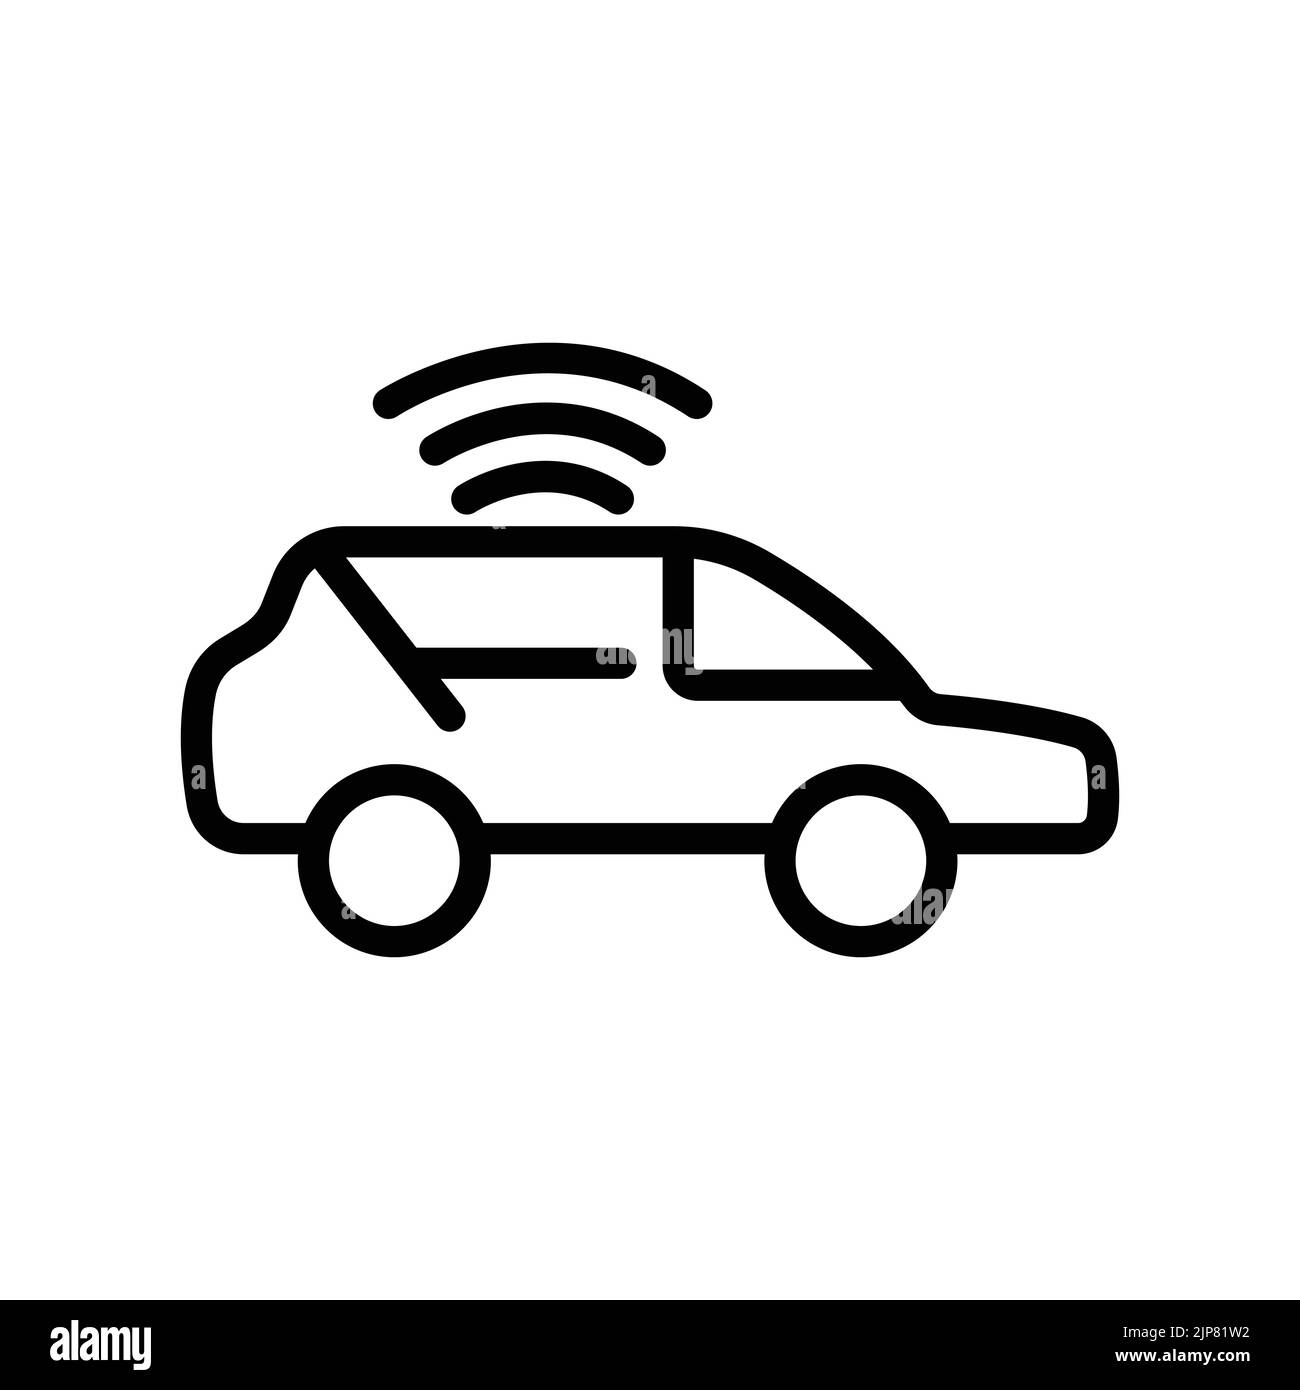 Car icon with signal. icon related to technology. smart device. transport device. line icon style. Simple design editable Stock Vector